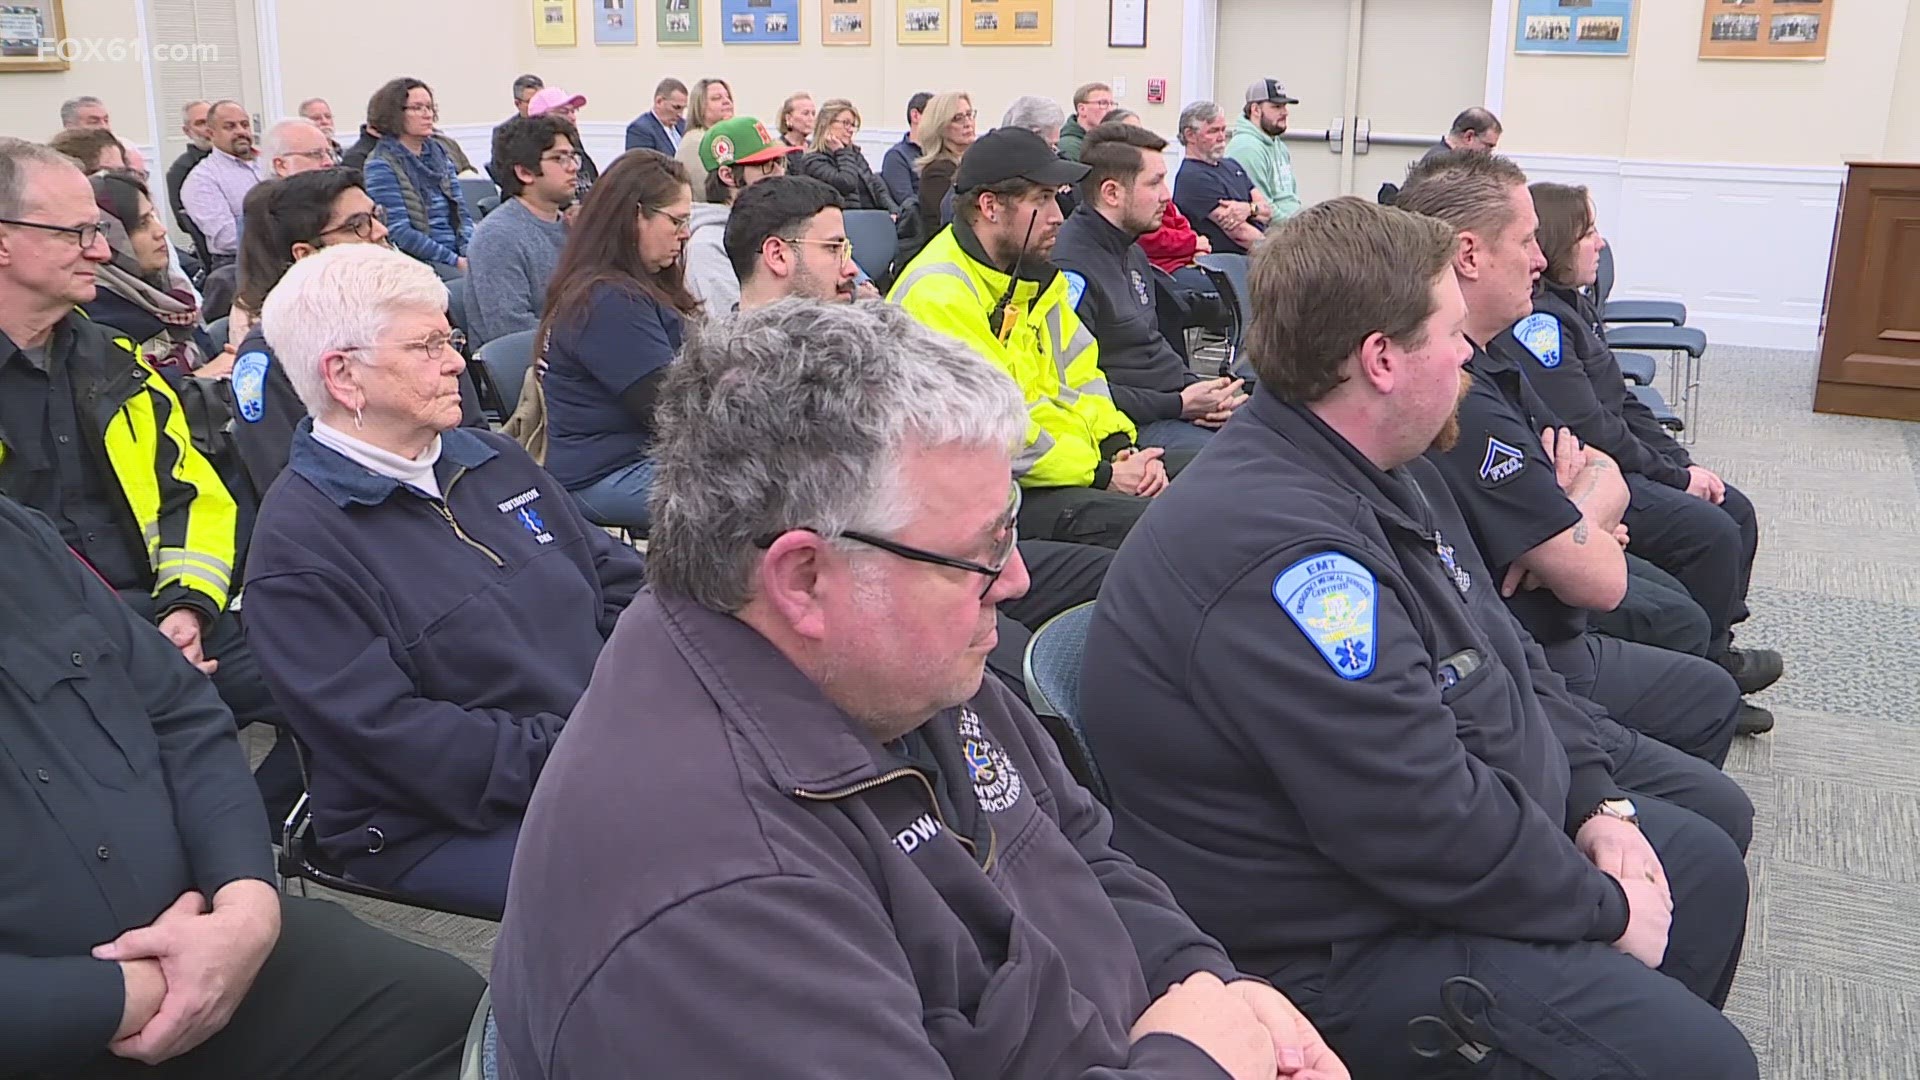 FOX61's Jake Garcia was in Wethersfield where the town council heard from people in the community about a proposed change to a new EMS provider.